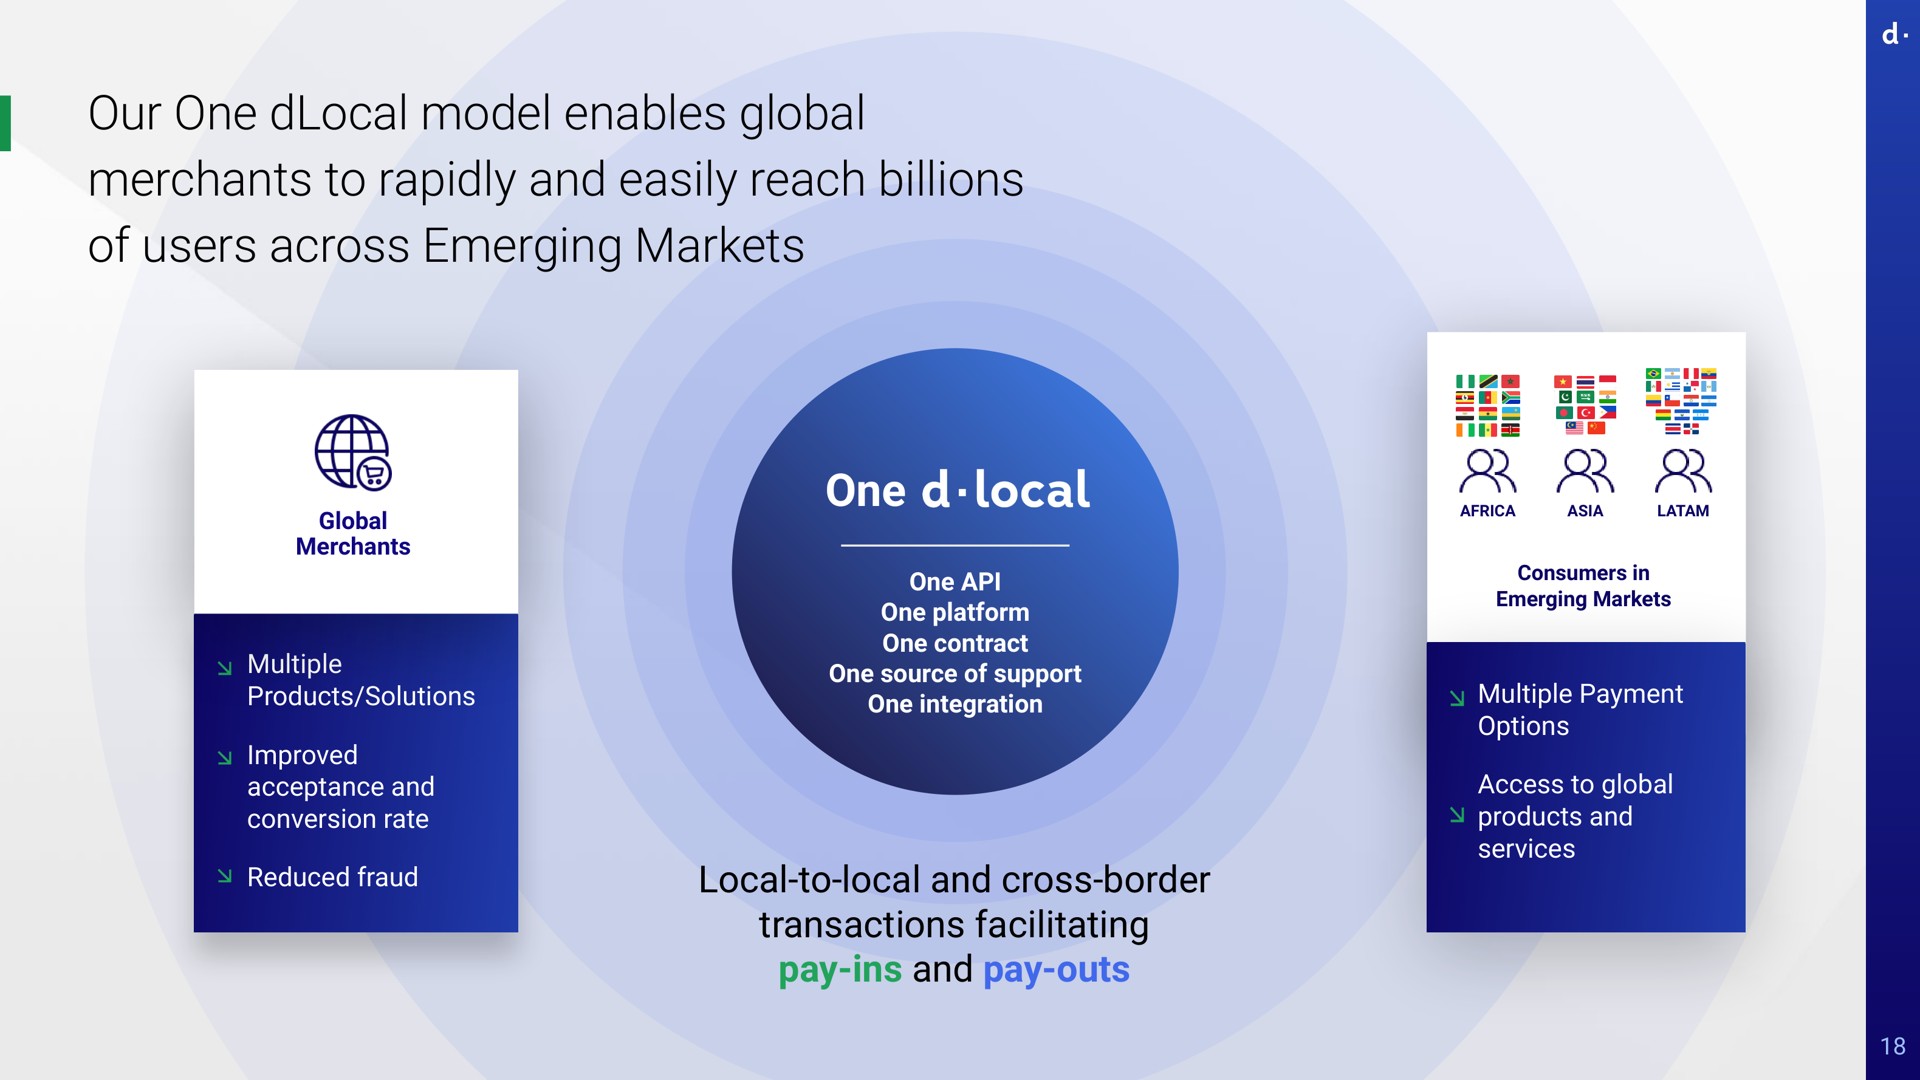 our one model enables global merchants to rapidly and easily reach billions of users across emerging markets global merchants multiple products solutions improved acceptance and conversion rate reduced fraud one one acquiring one platform one contract one source of support one integration local to local and cross border transactions facilitating pay ins and pay outs consumers in emerging markets multiple payment options access to global products and services tale local ere | dLocal